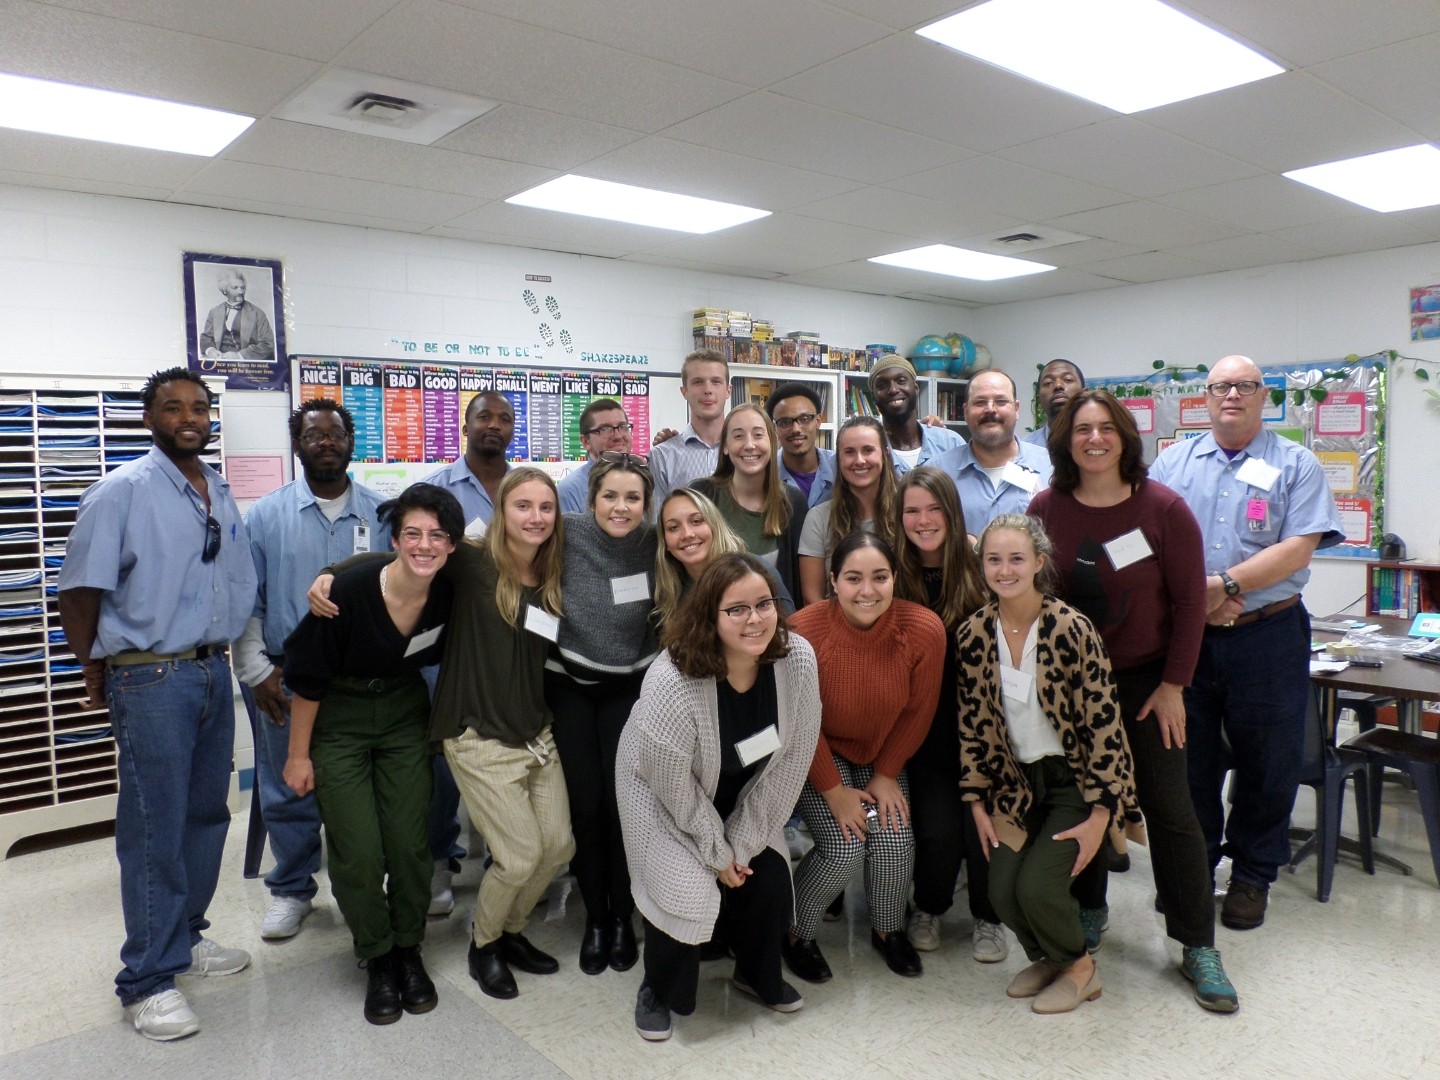 Students from Professor Goluboff’s class - "Narrating Our Stories: Culture, Society, and Identity" taught at Augusta Correctional in Fall 2019